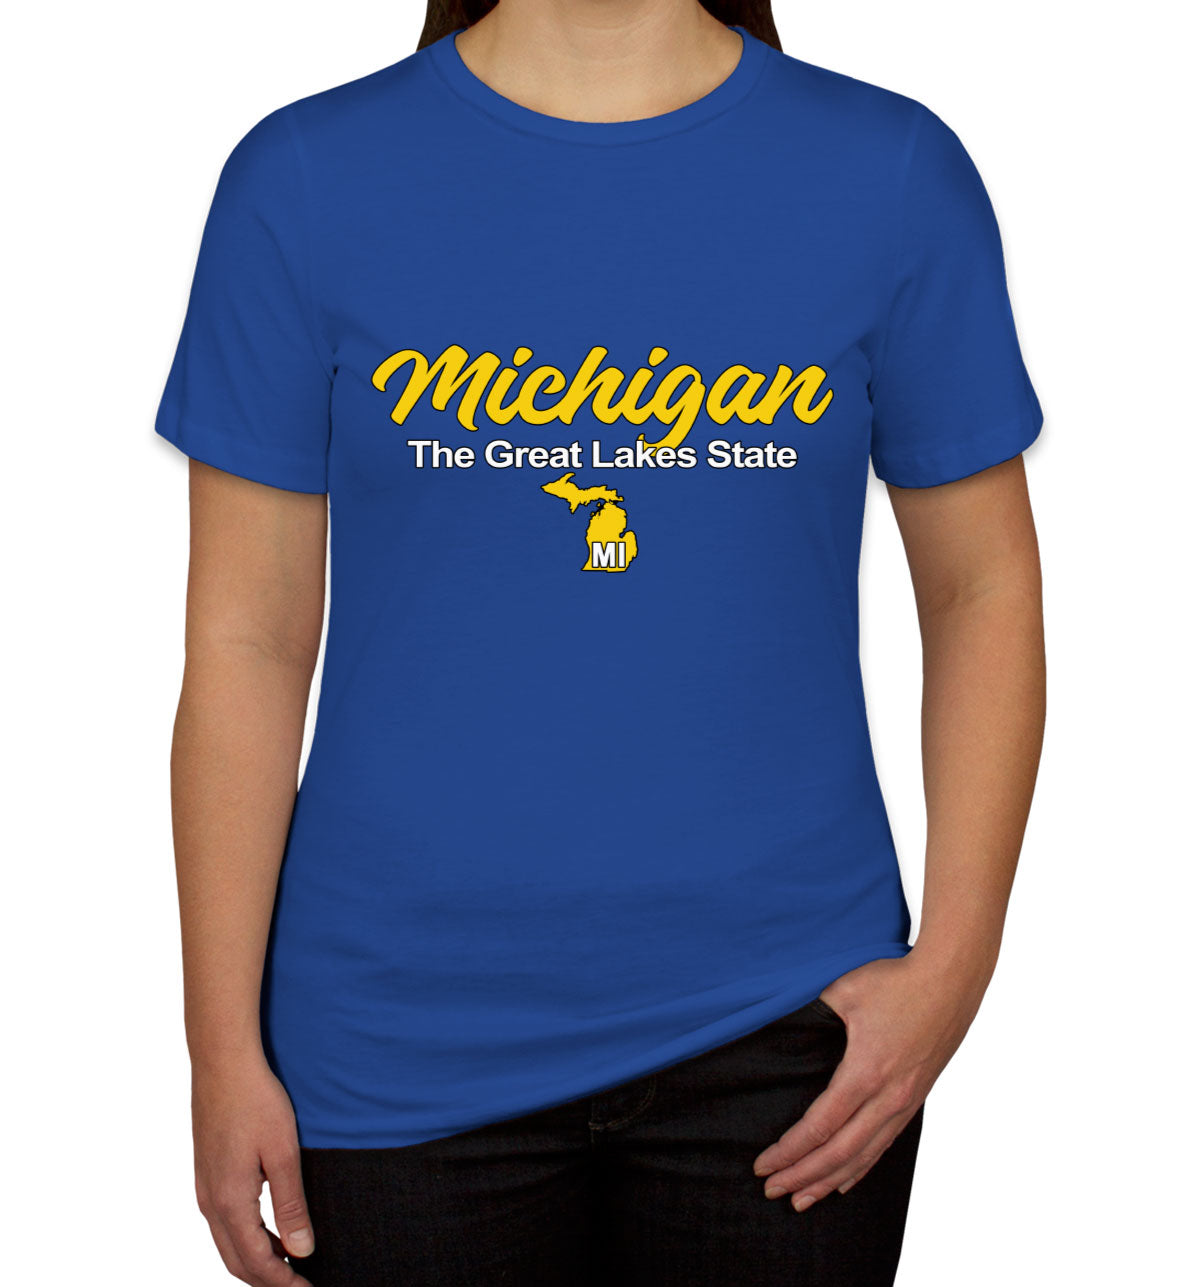 Michigan The Great Lakes State Women's T-shirt